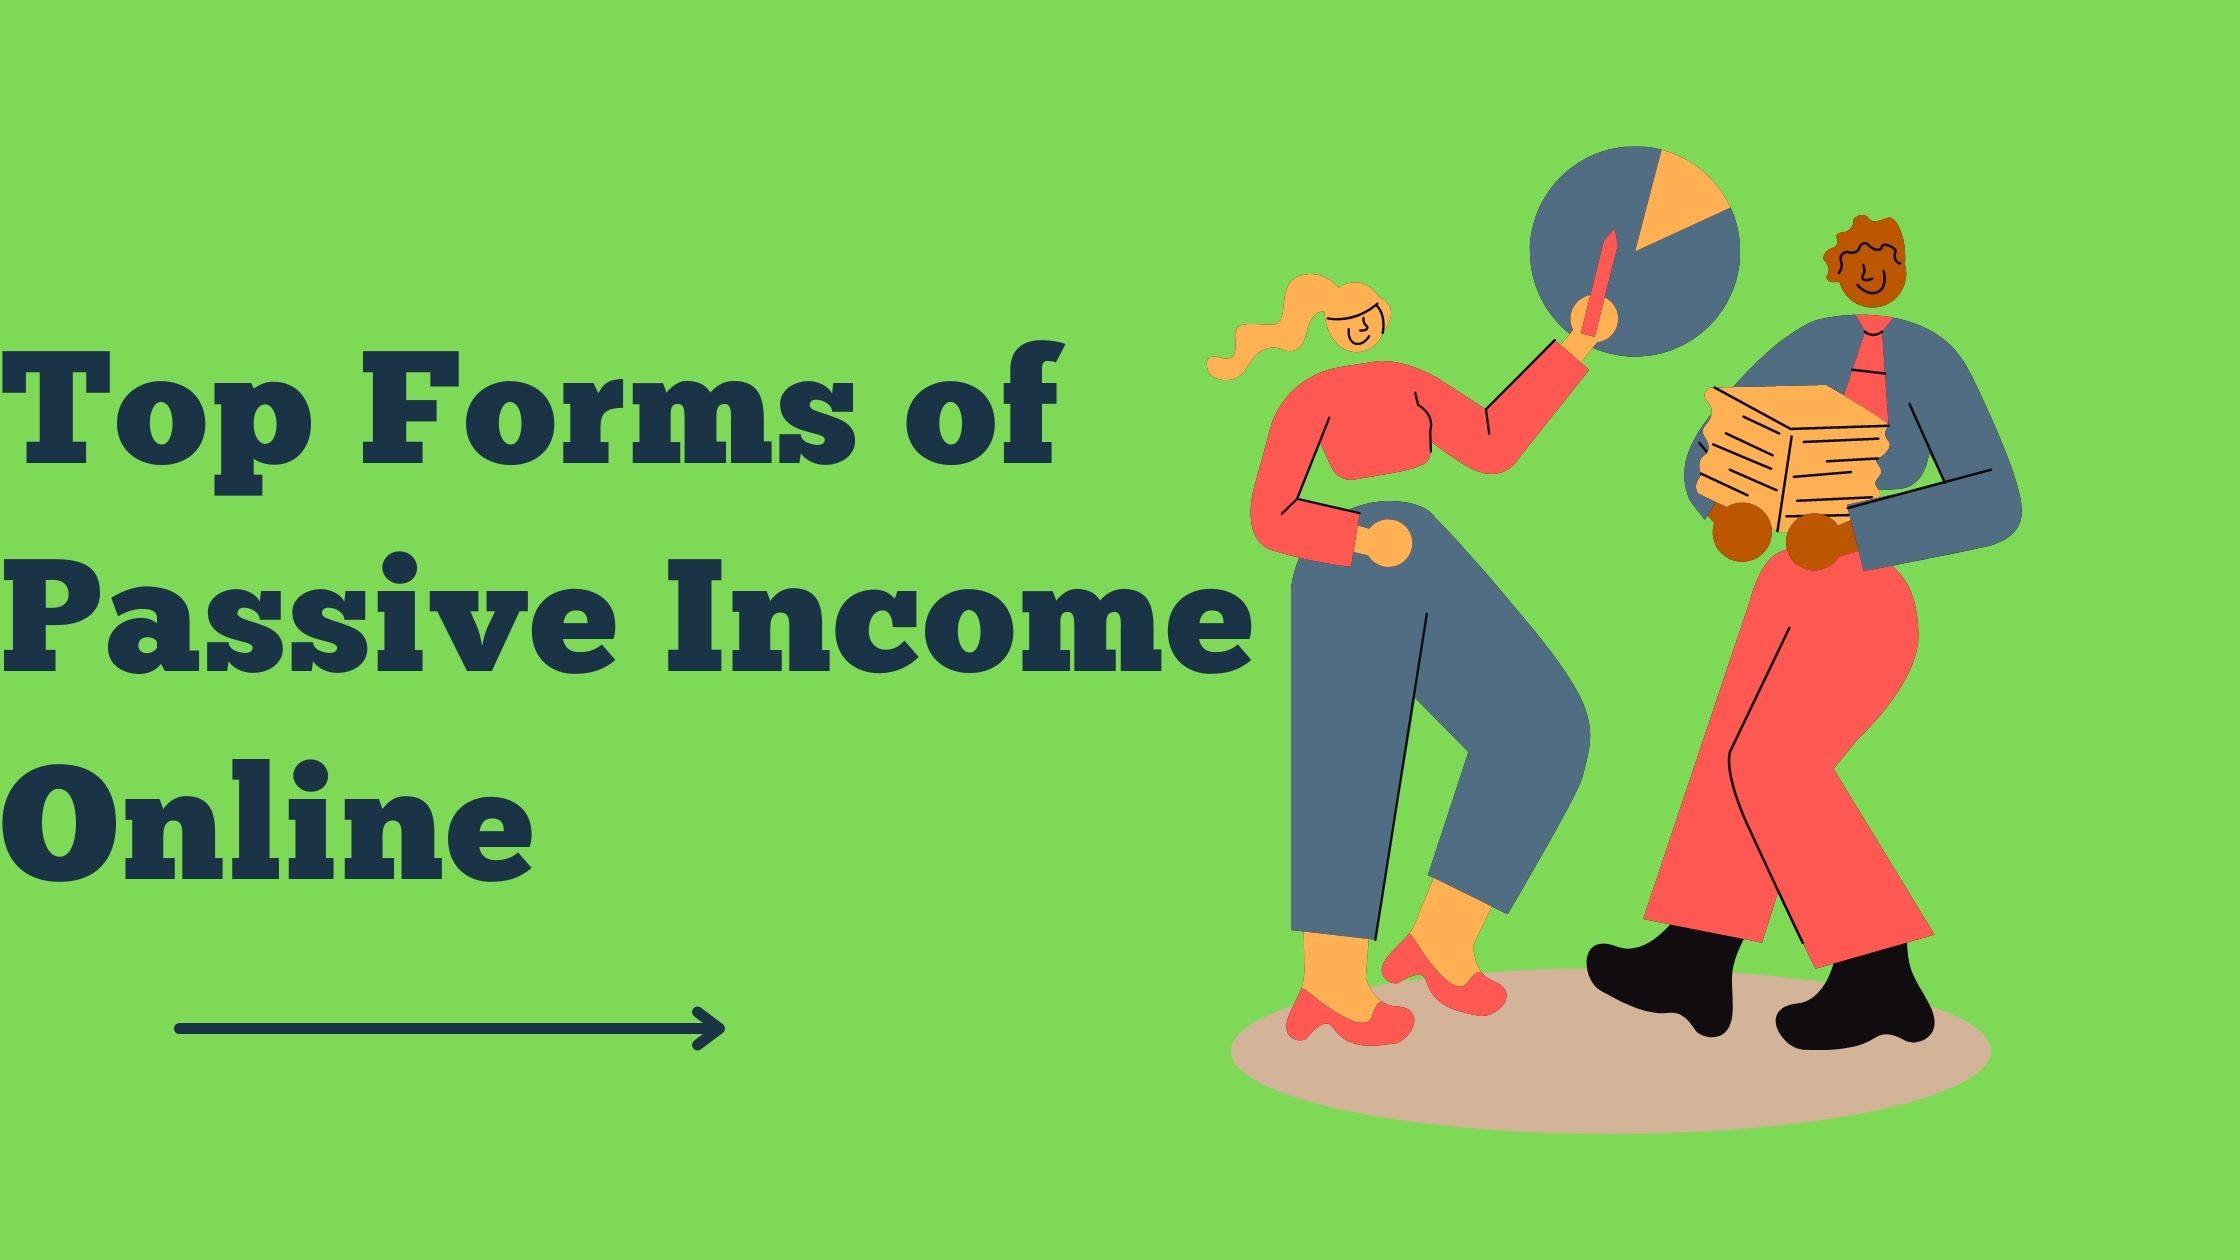 Top Forms of Passive Income Online